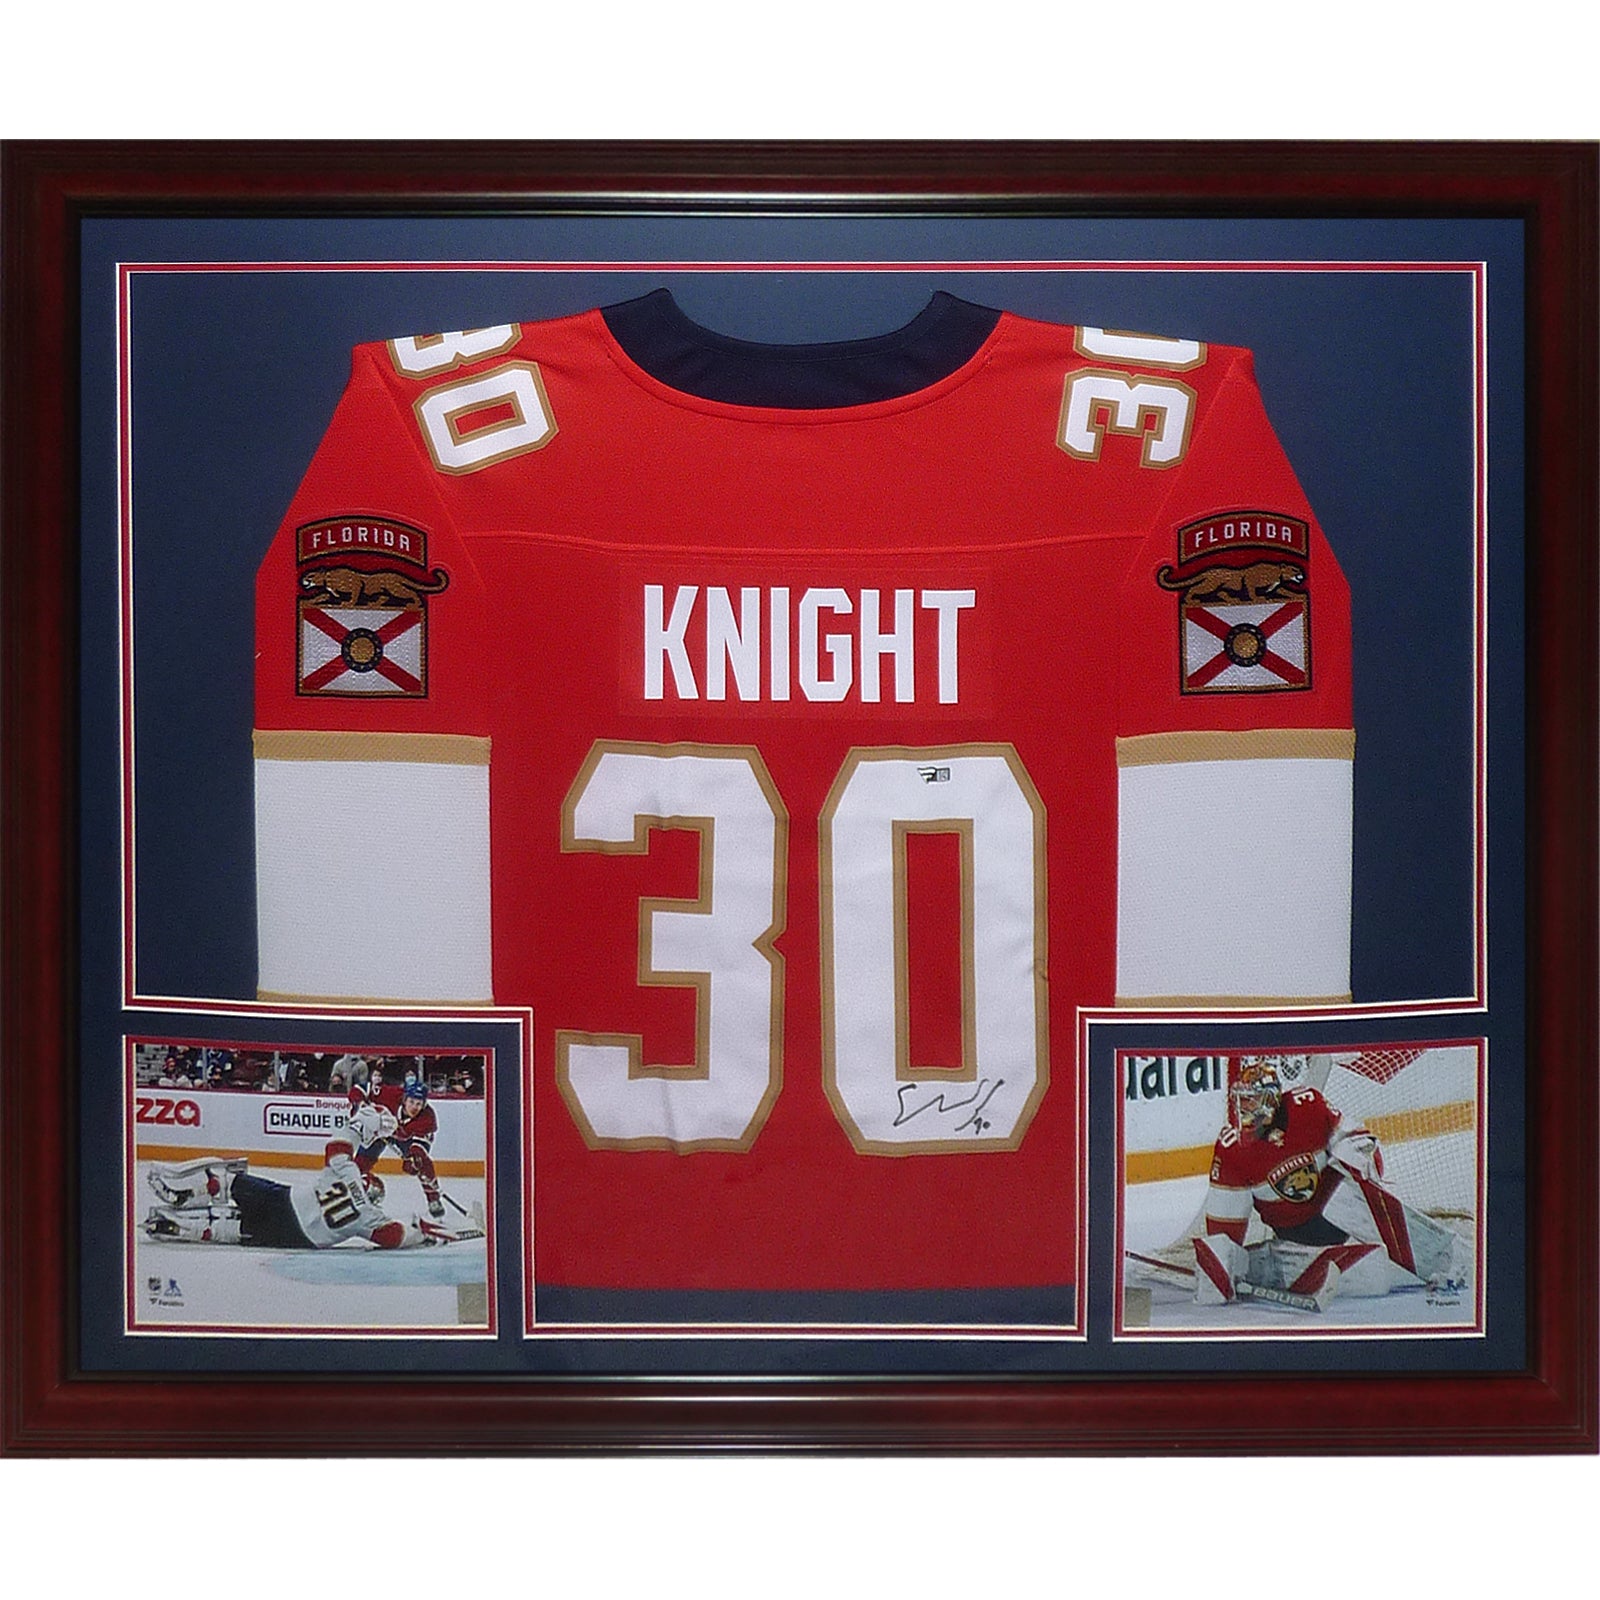 SPENCER KNIGHT Autographed Florida Panthers Authentic Jersey